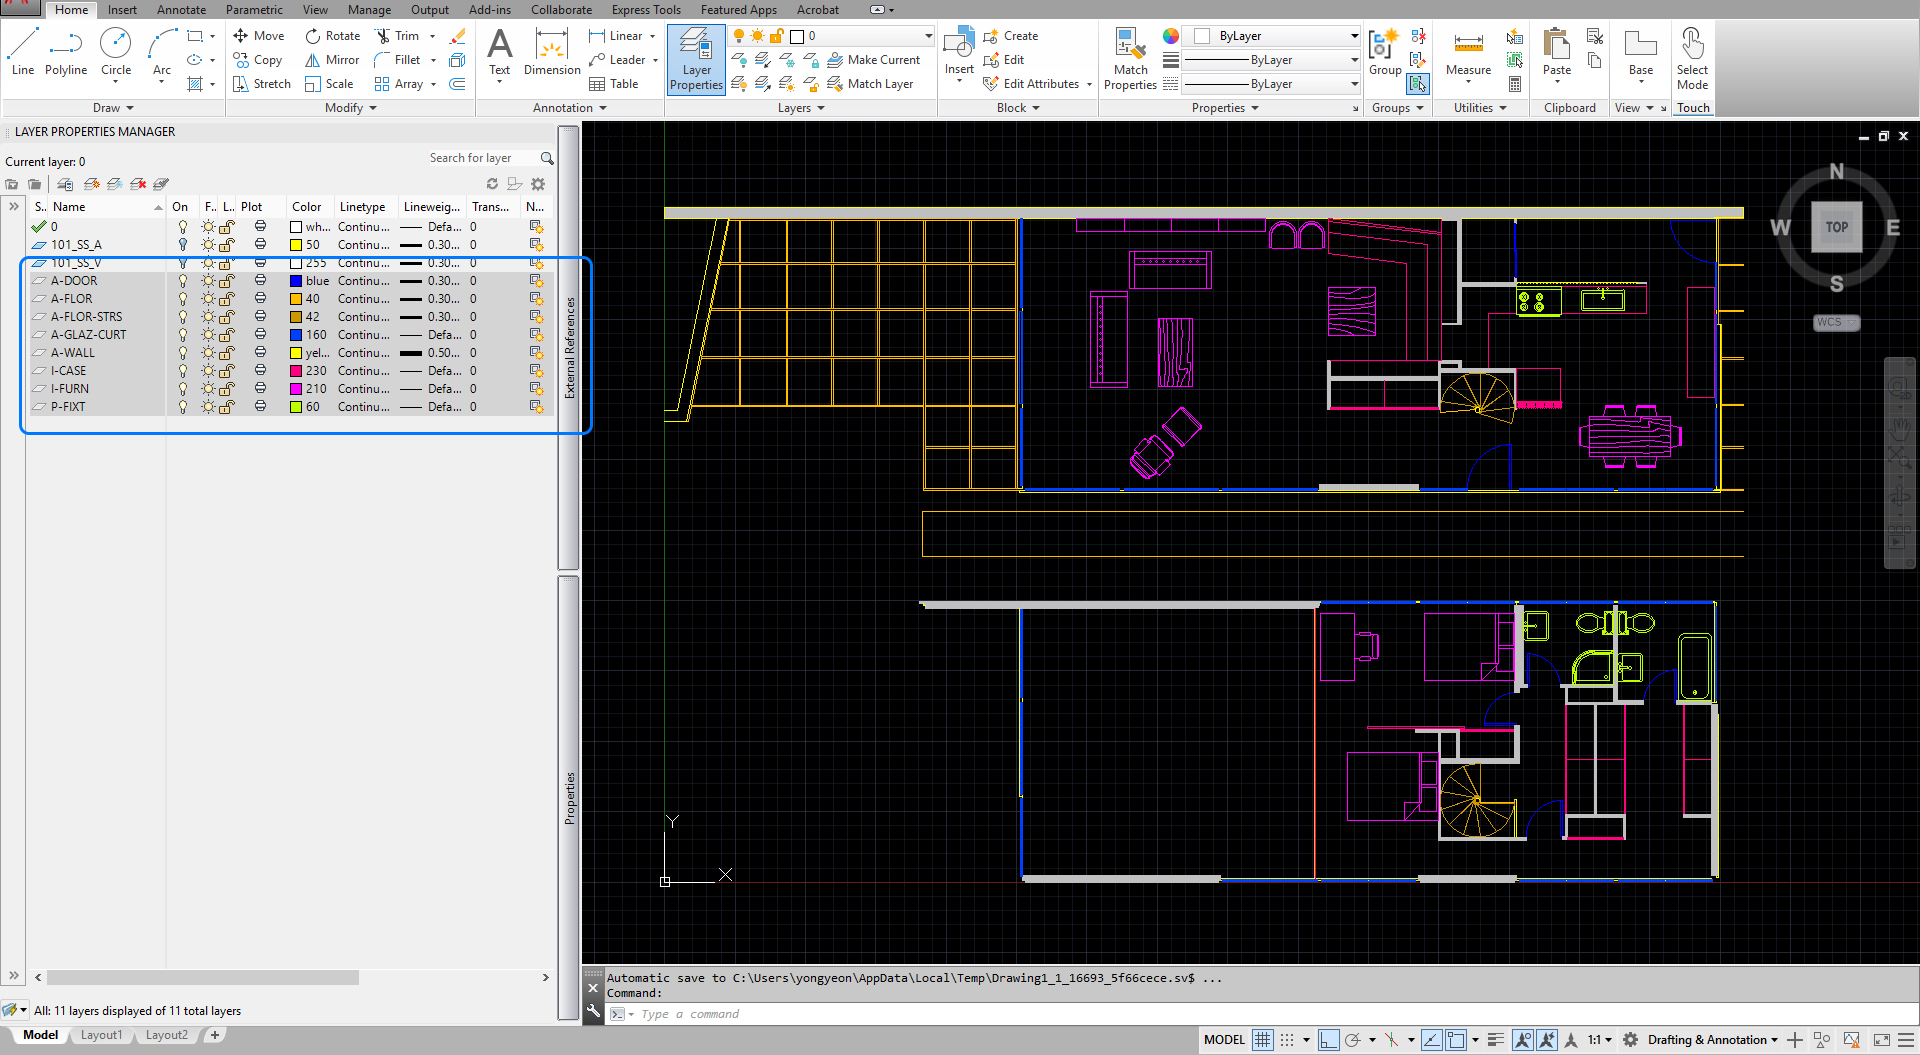 It shows the CAD Layers that are not needed for the diagrams.